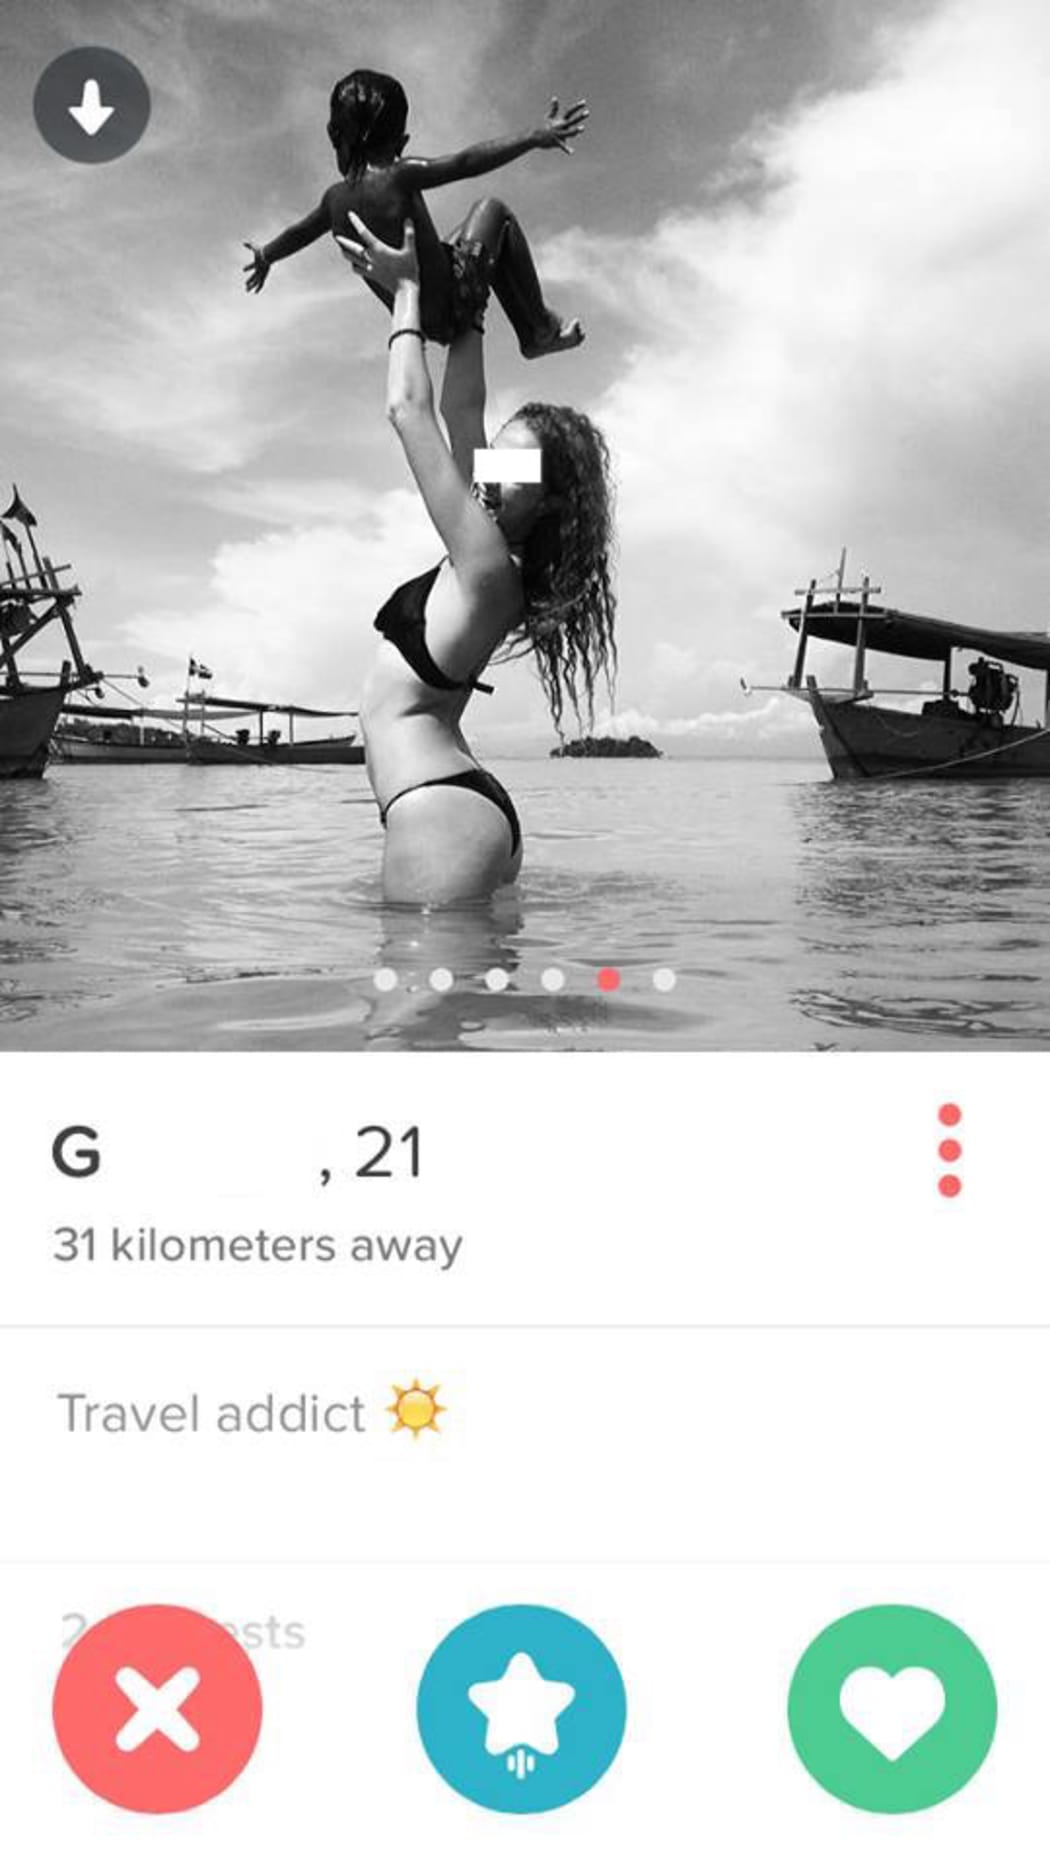 Tumblr 'Humanitarians of Tinder' snaps people using unsuspecting children in their dating profiles